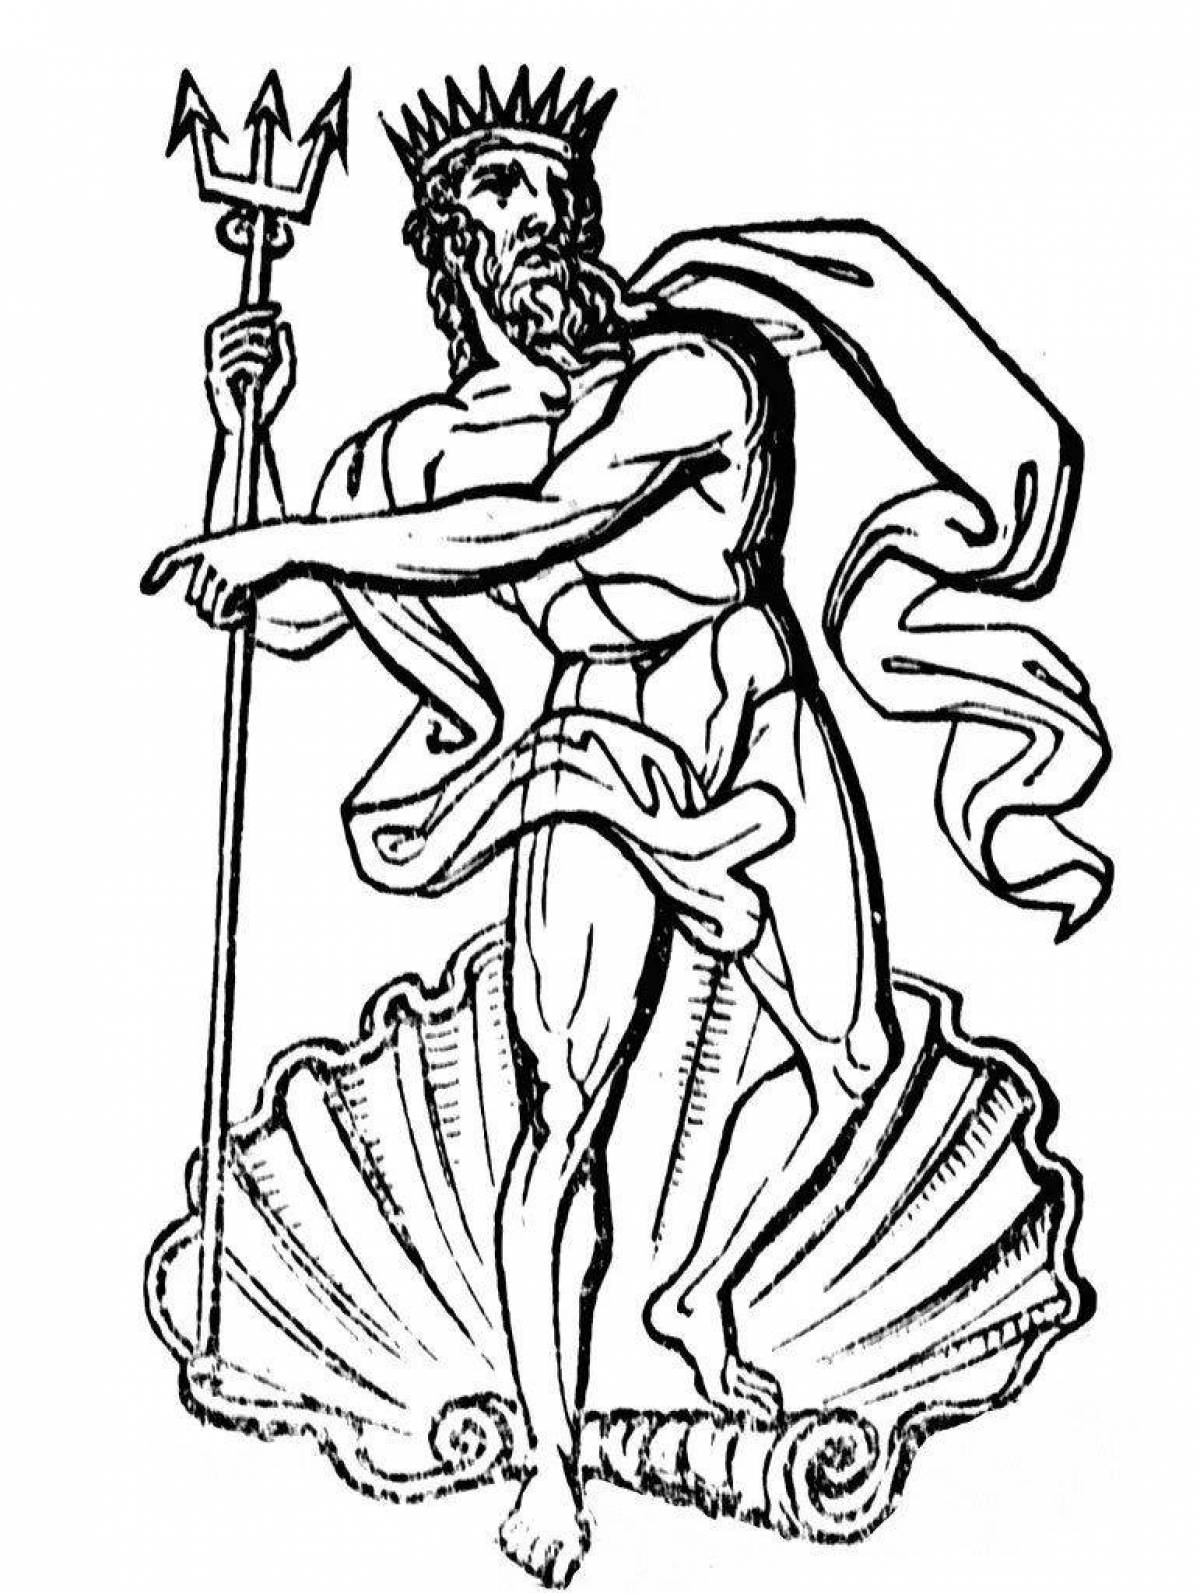 Exalted greek gods coloring book